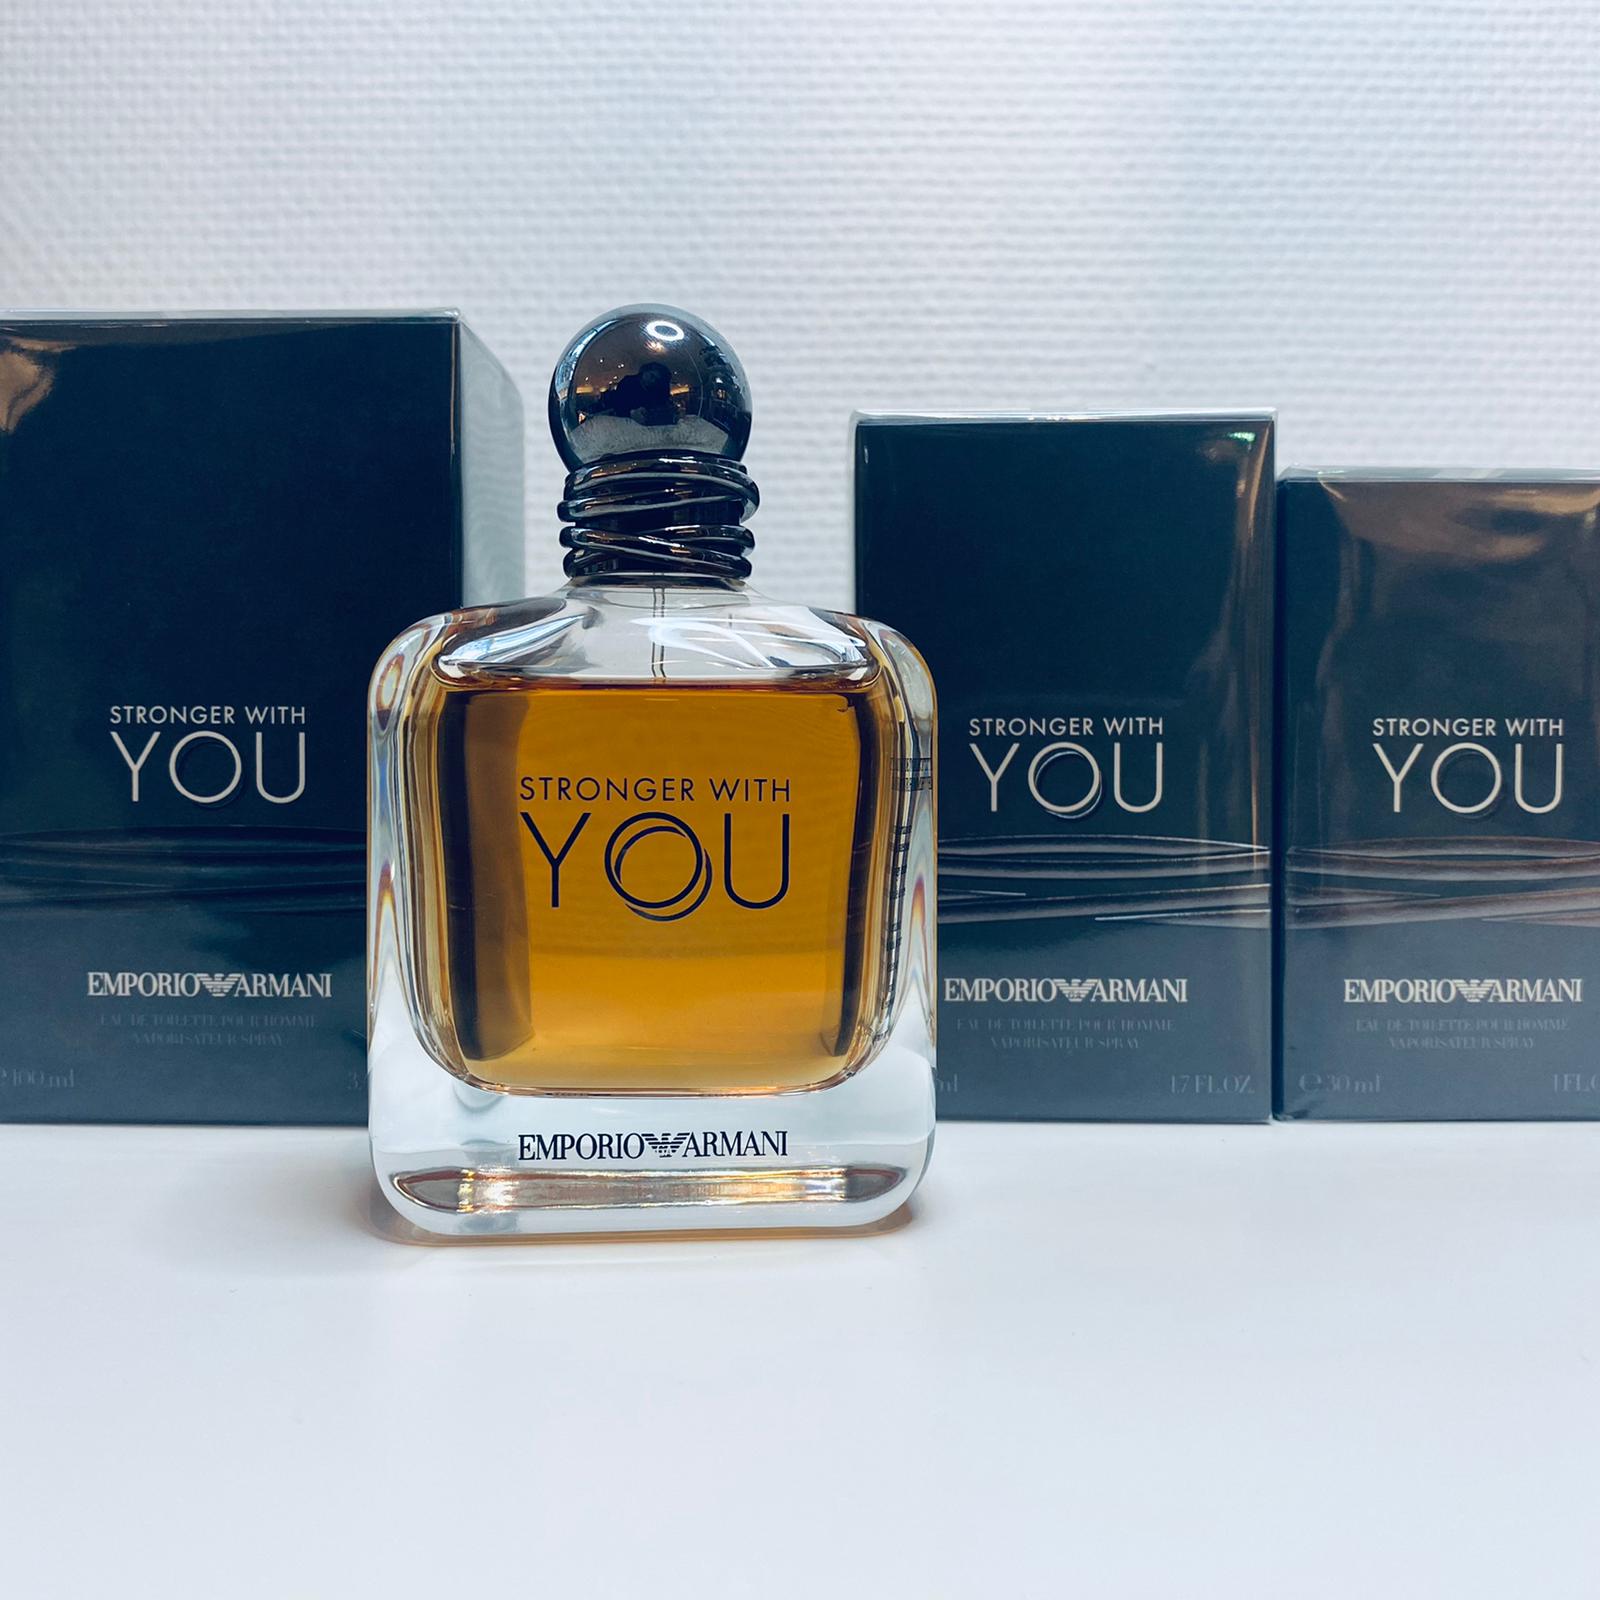 Emporio Armani stronger with you EDT 100 ml